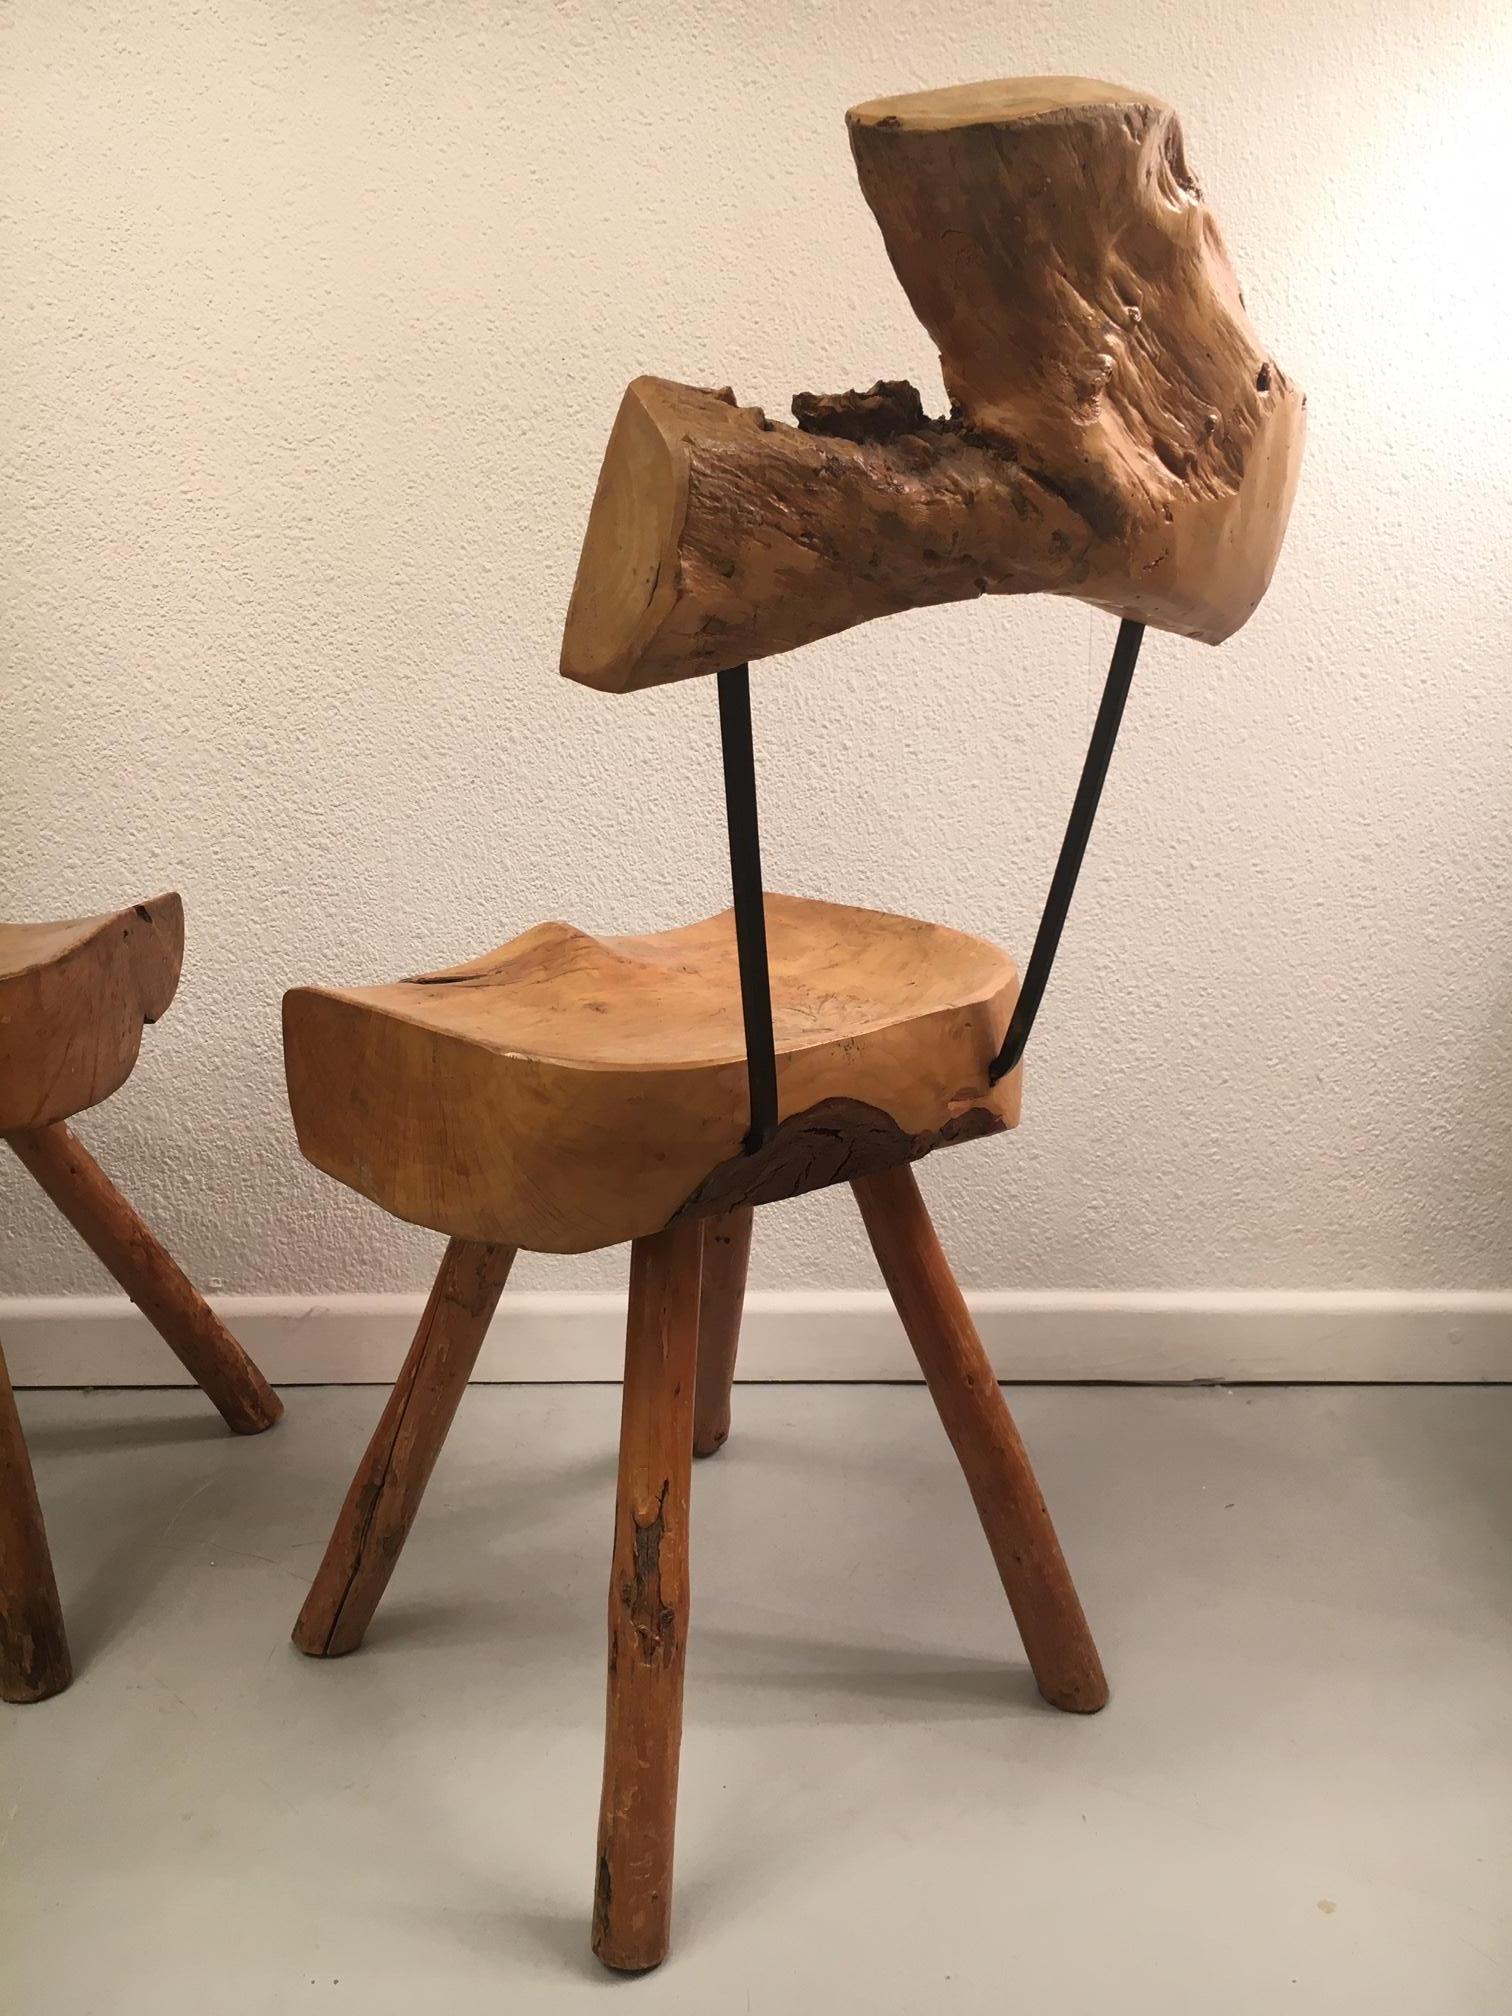 Set of 5 Solid Olive Wood Brutalist Rustic Dining Chairs, circa 1950s For Sale 5